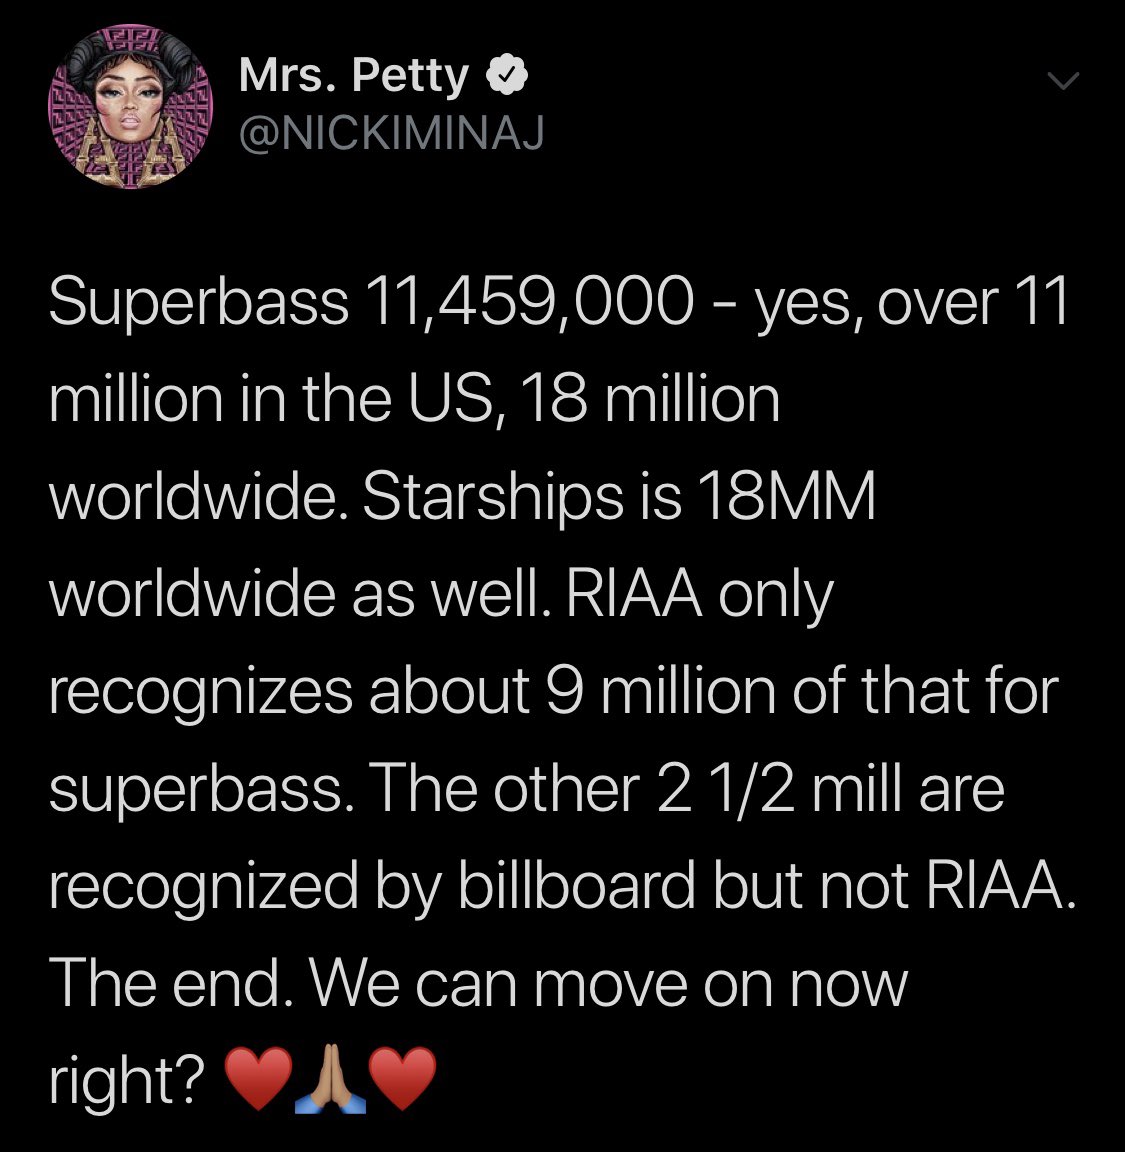 “Nicki doesn’t have a diamond record” Nicki Minaj is the first female rapper to sell 10m units with two songs. RIAA rules does not change that.